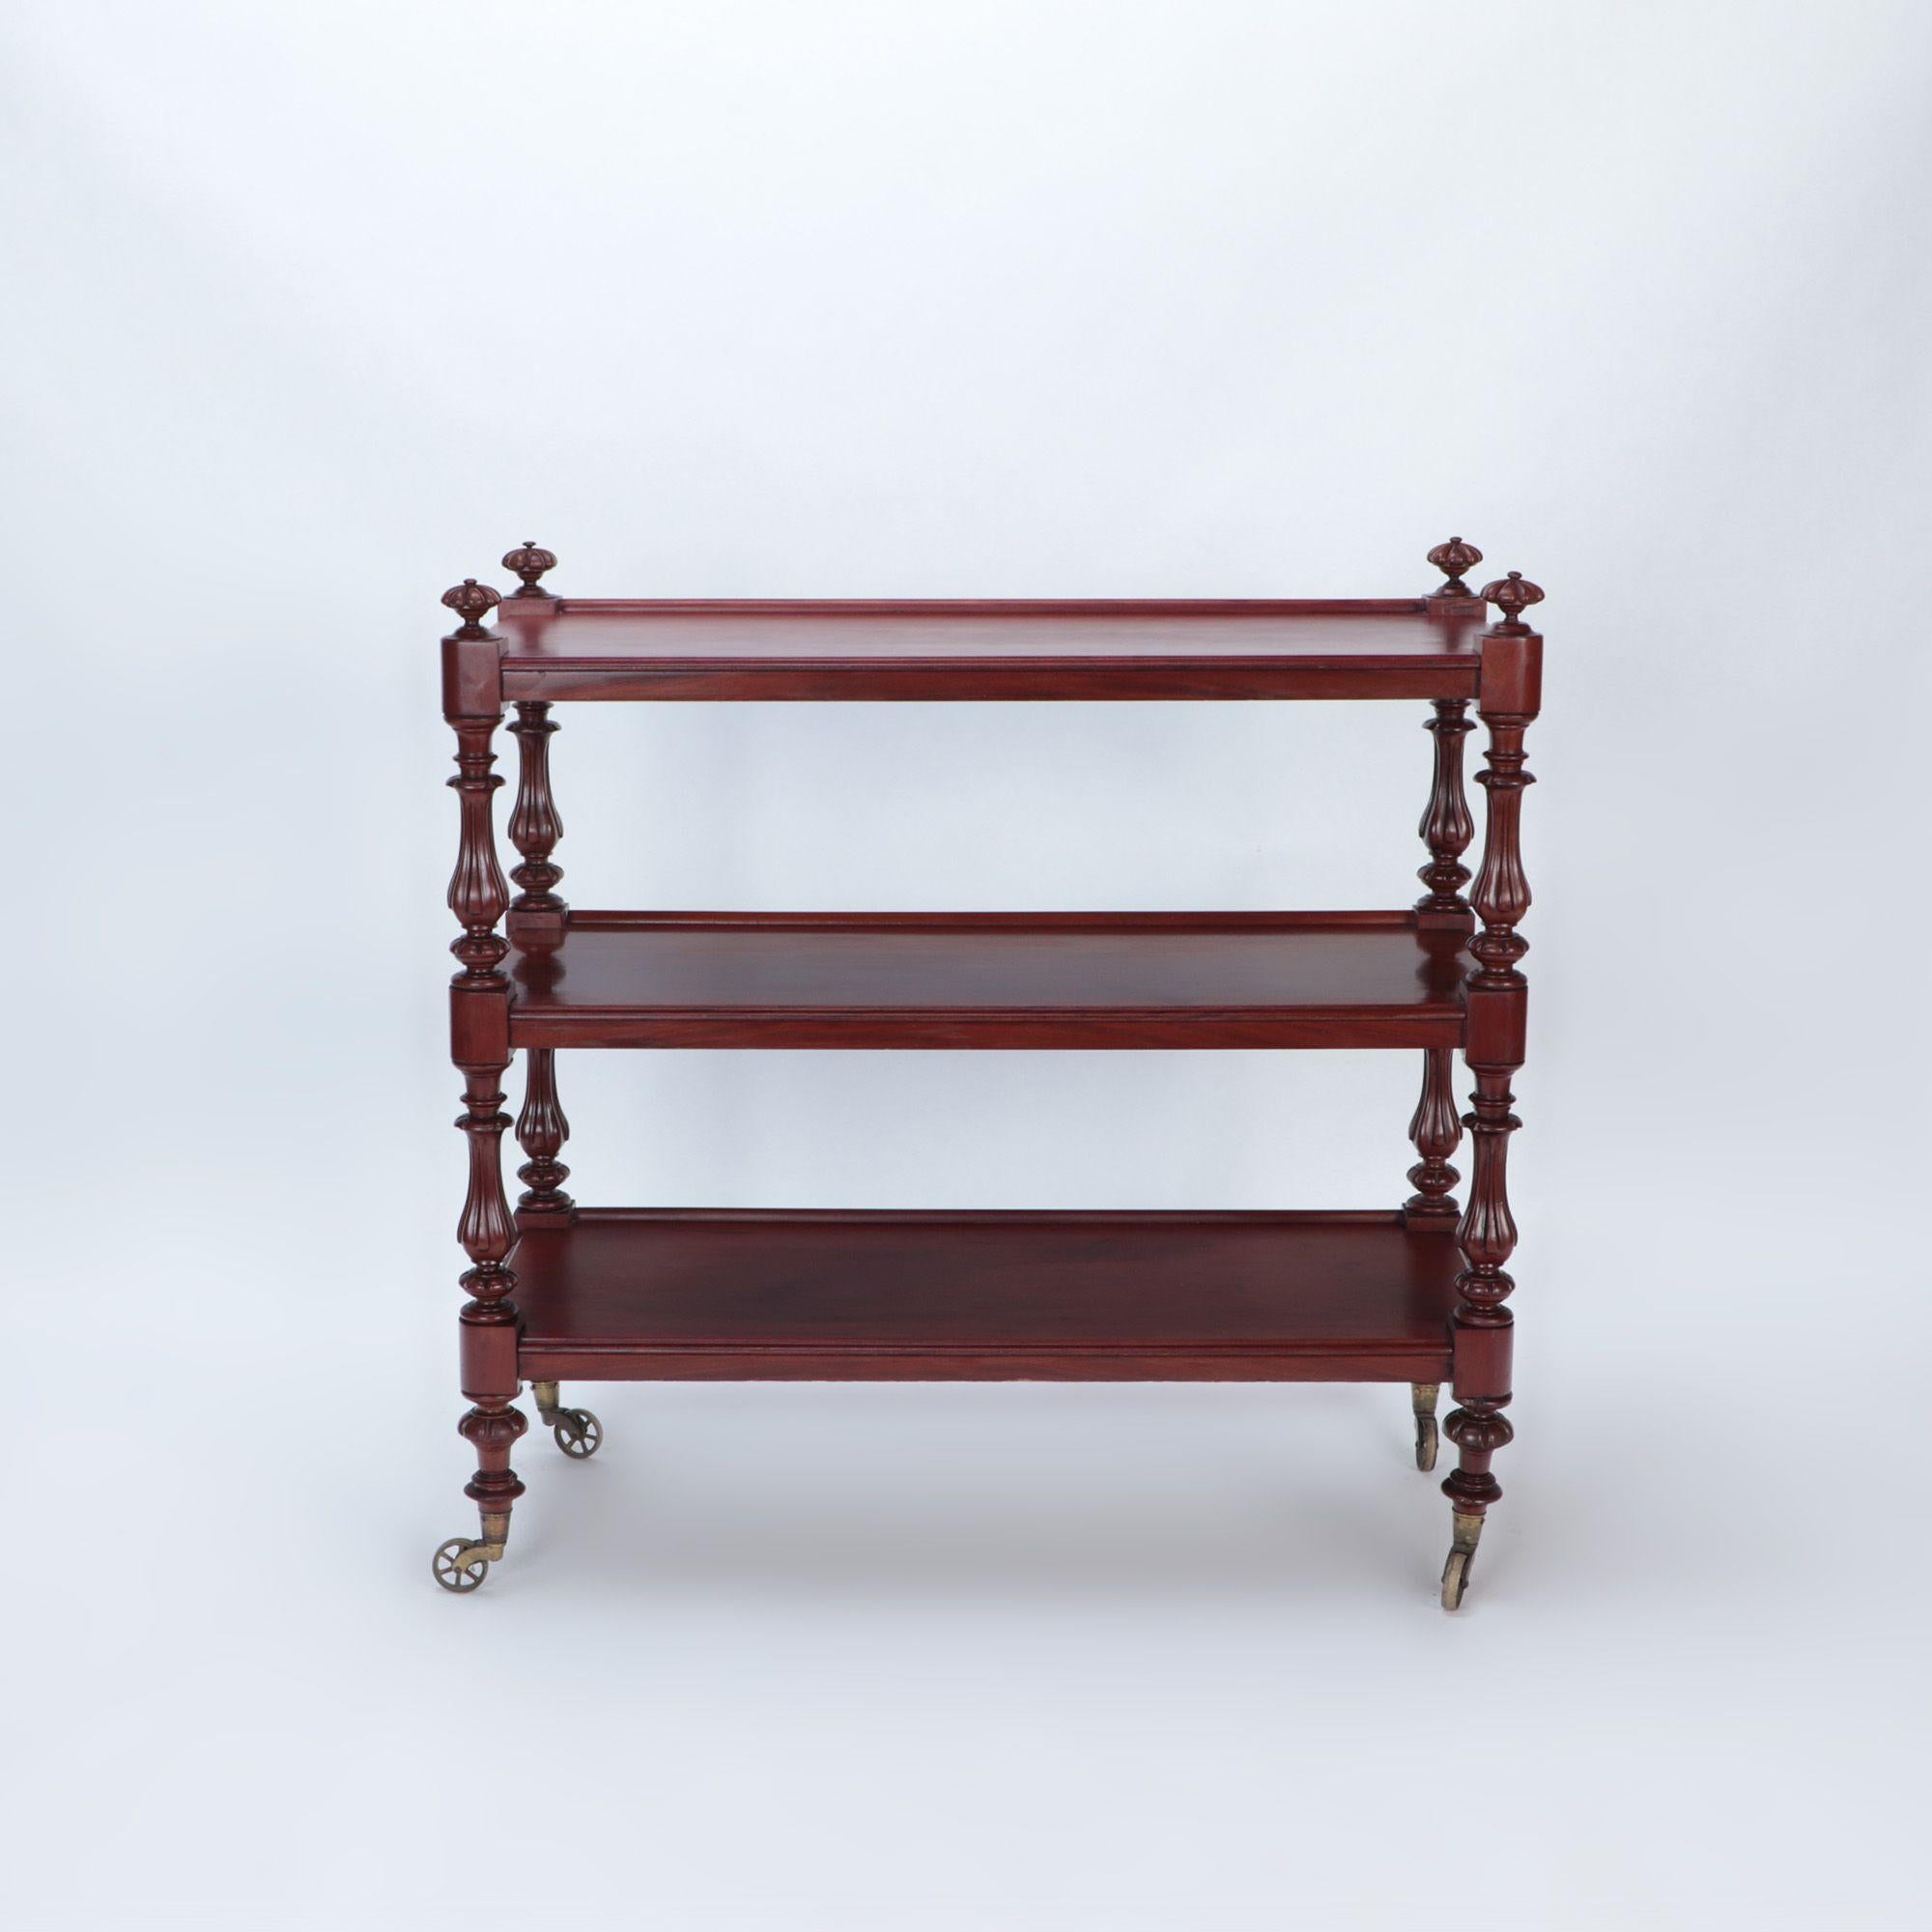 An English mahogany 19th century three tier dessert on wheels having shaped and carved columns.